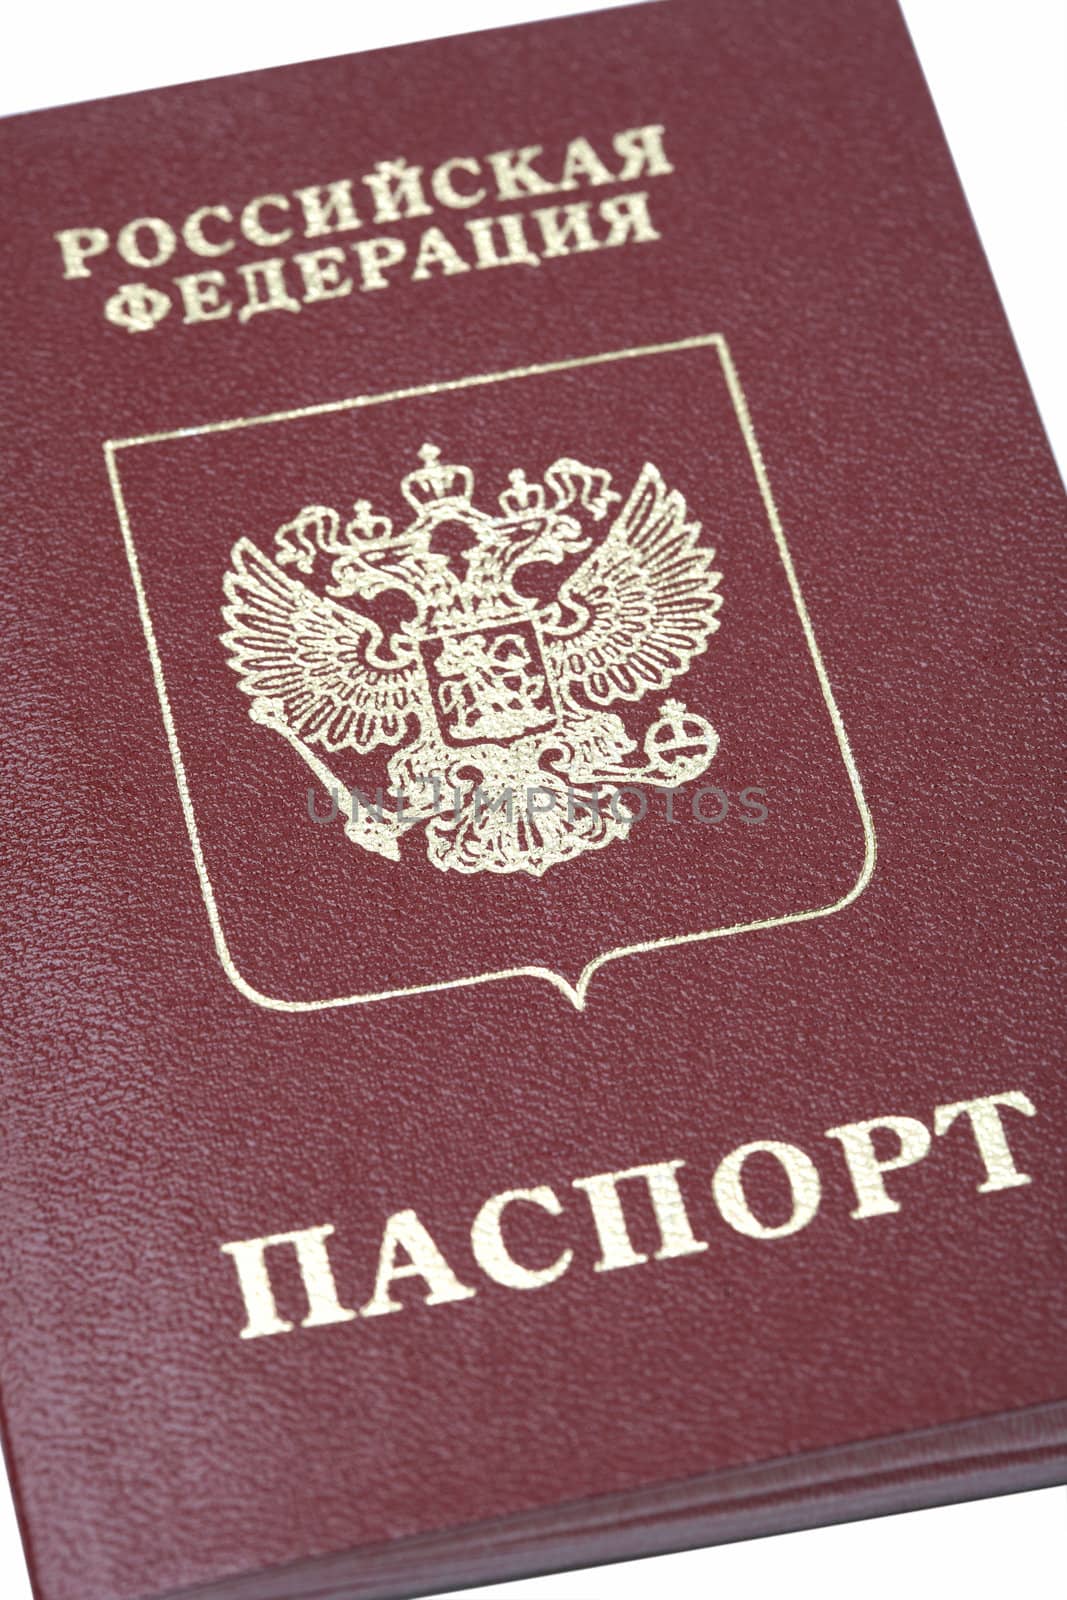 Russian Passport by Astroid